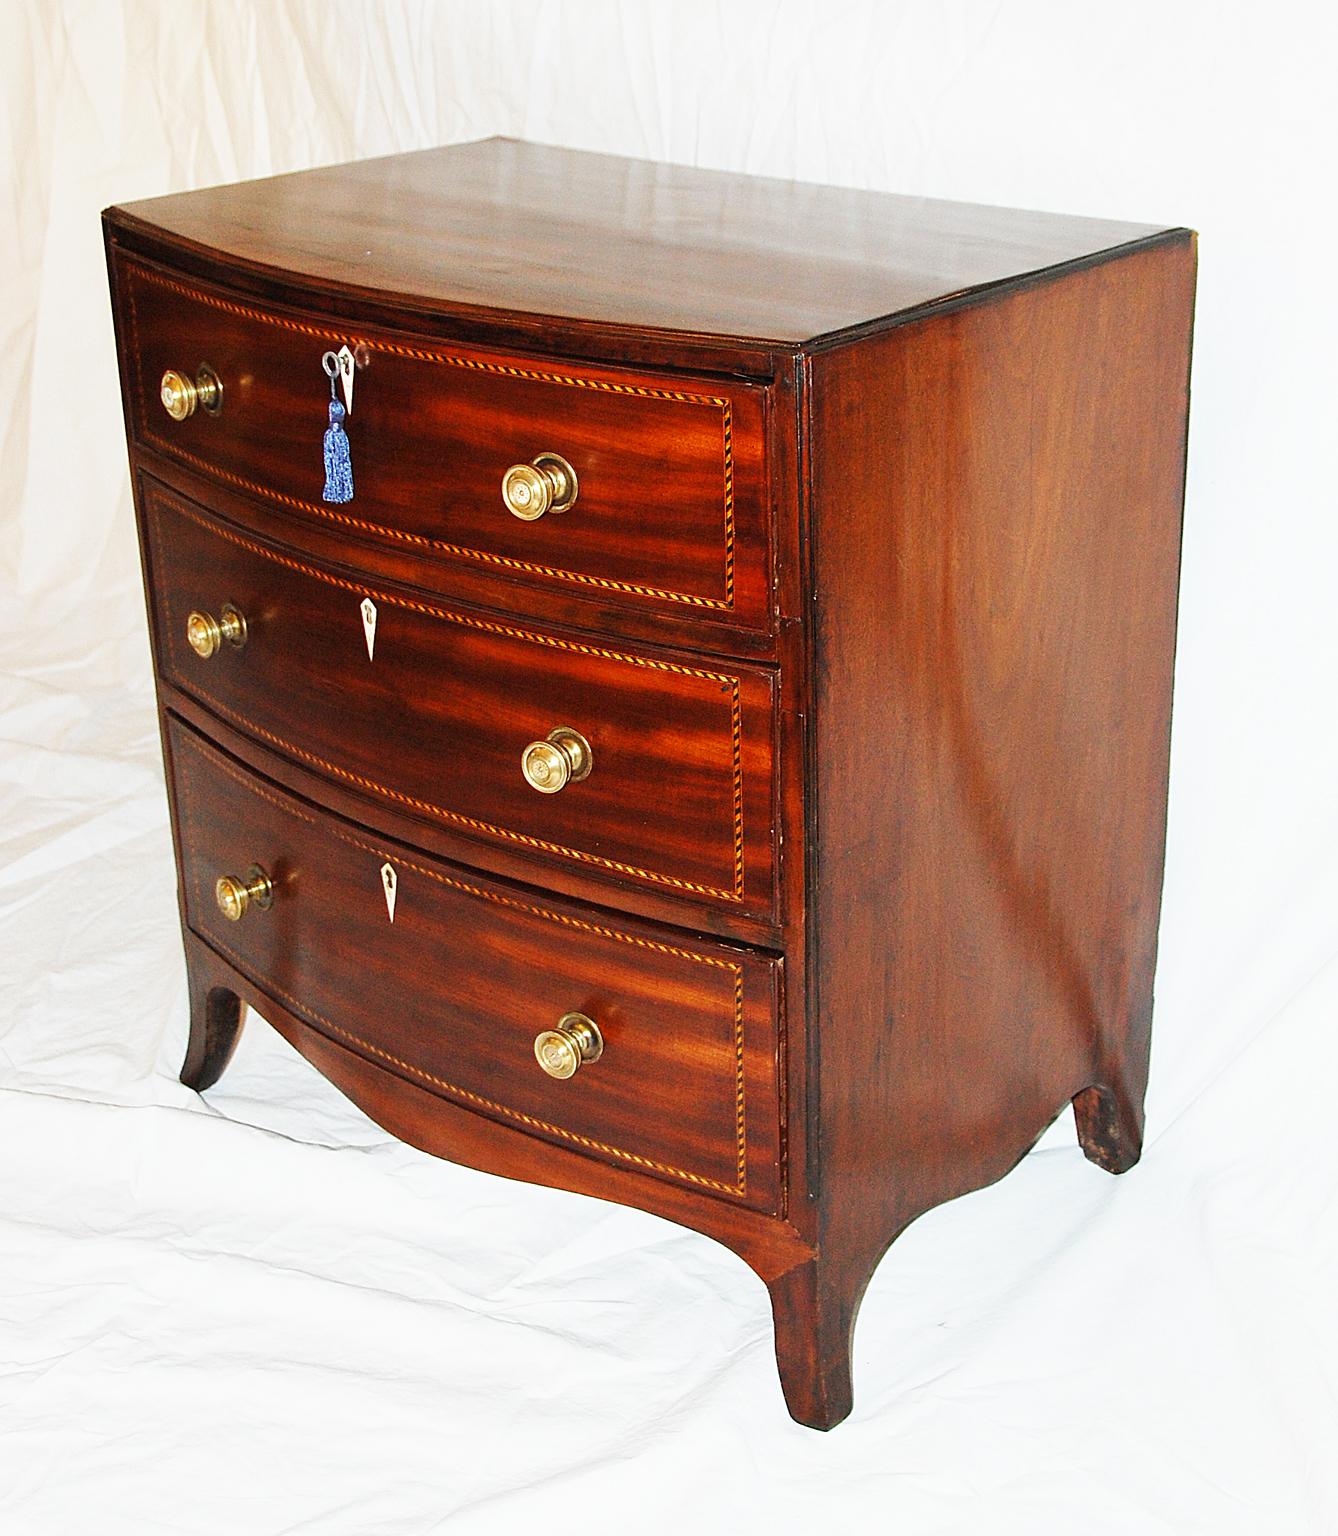 19th Century English Georgian Period Small Hepplewhite Bowfront Chest of Drawers with Inlay